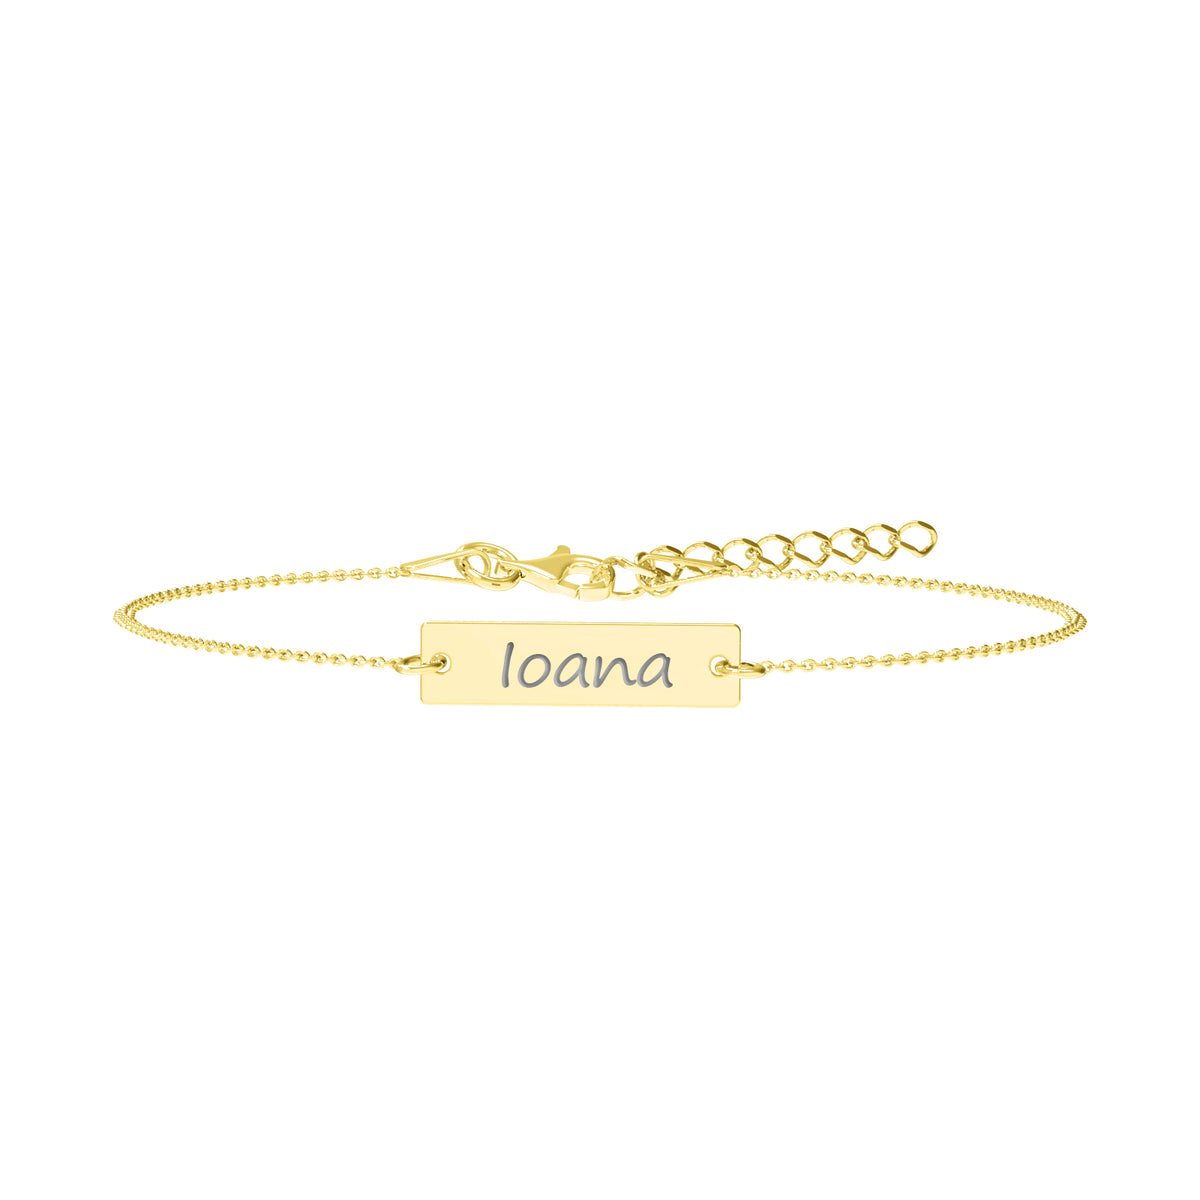 PERSONALIZED PLATED BRACELET 19x5 MM, silver plated with gold